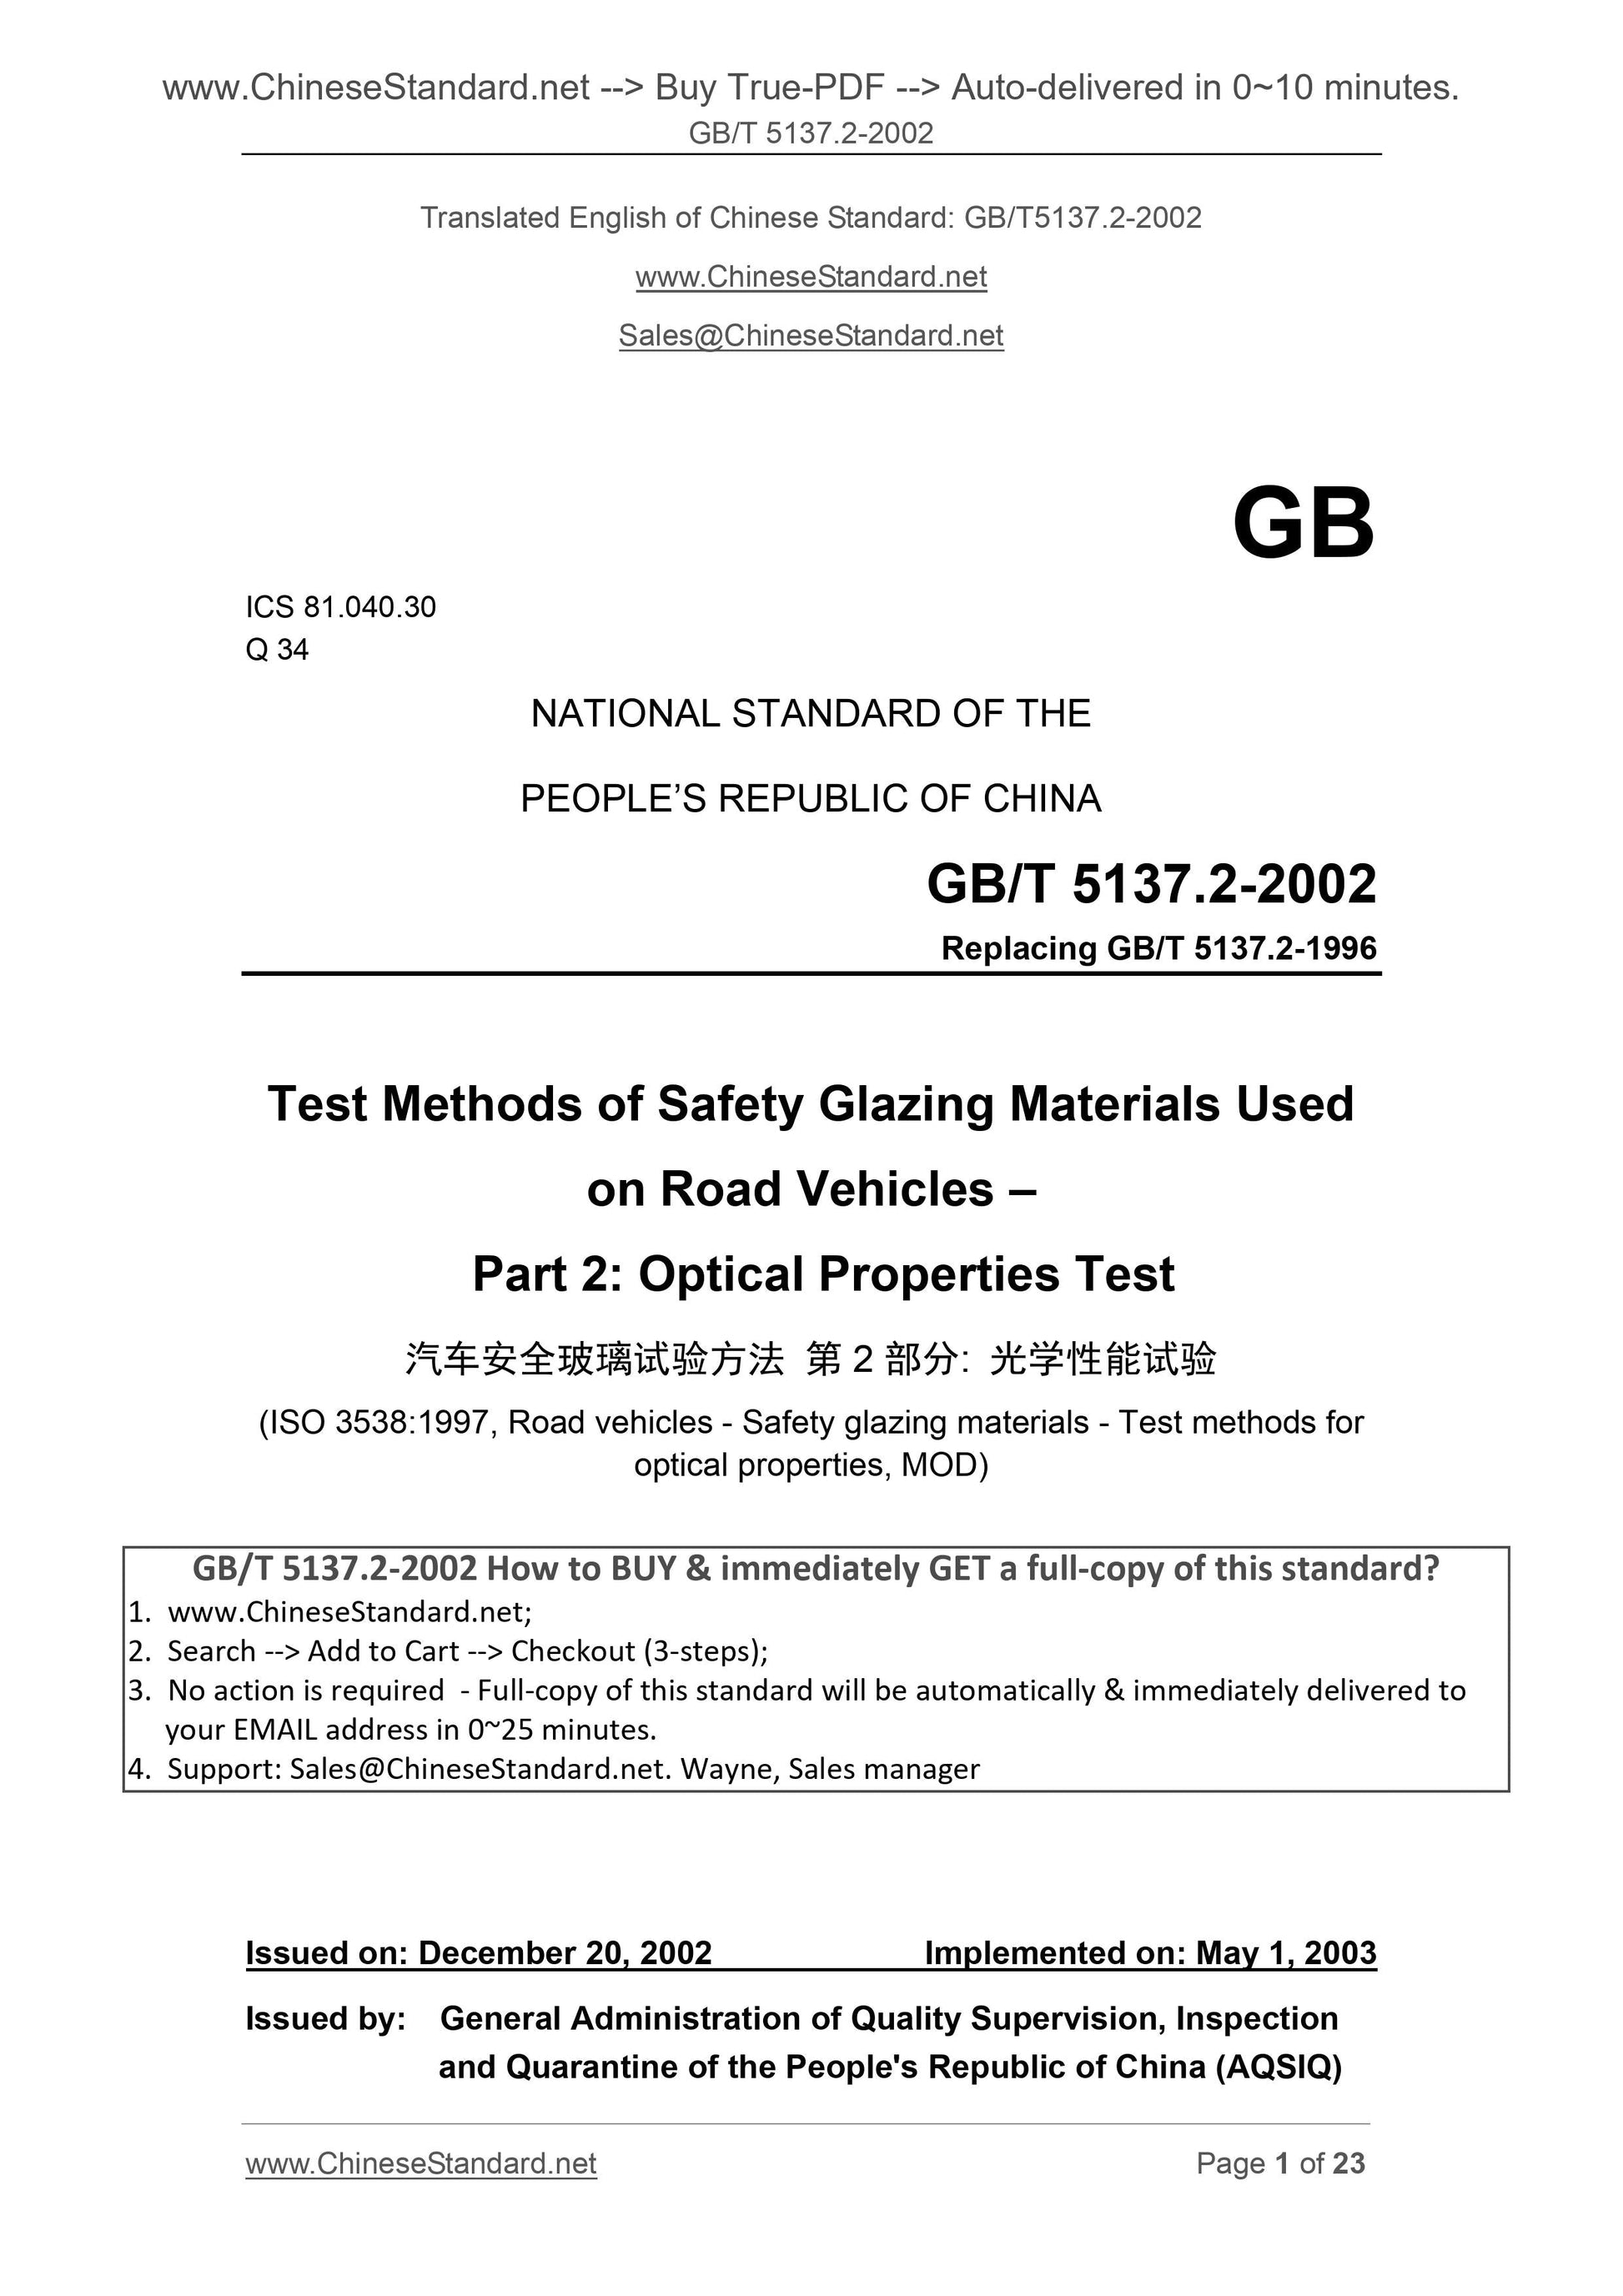 GB/T 5137.2-2002 Page 1